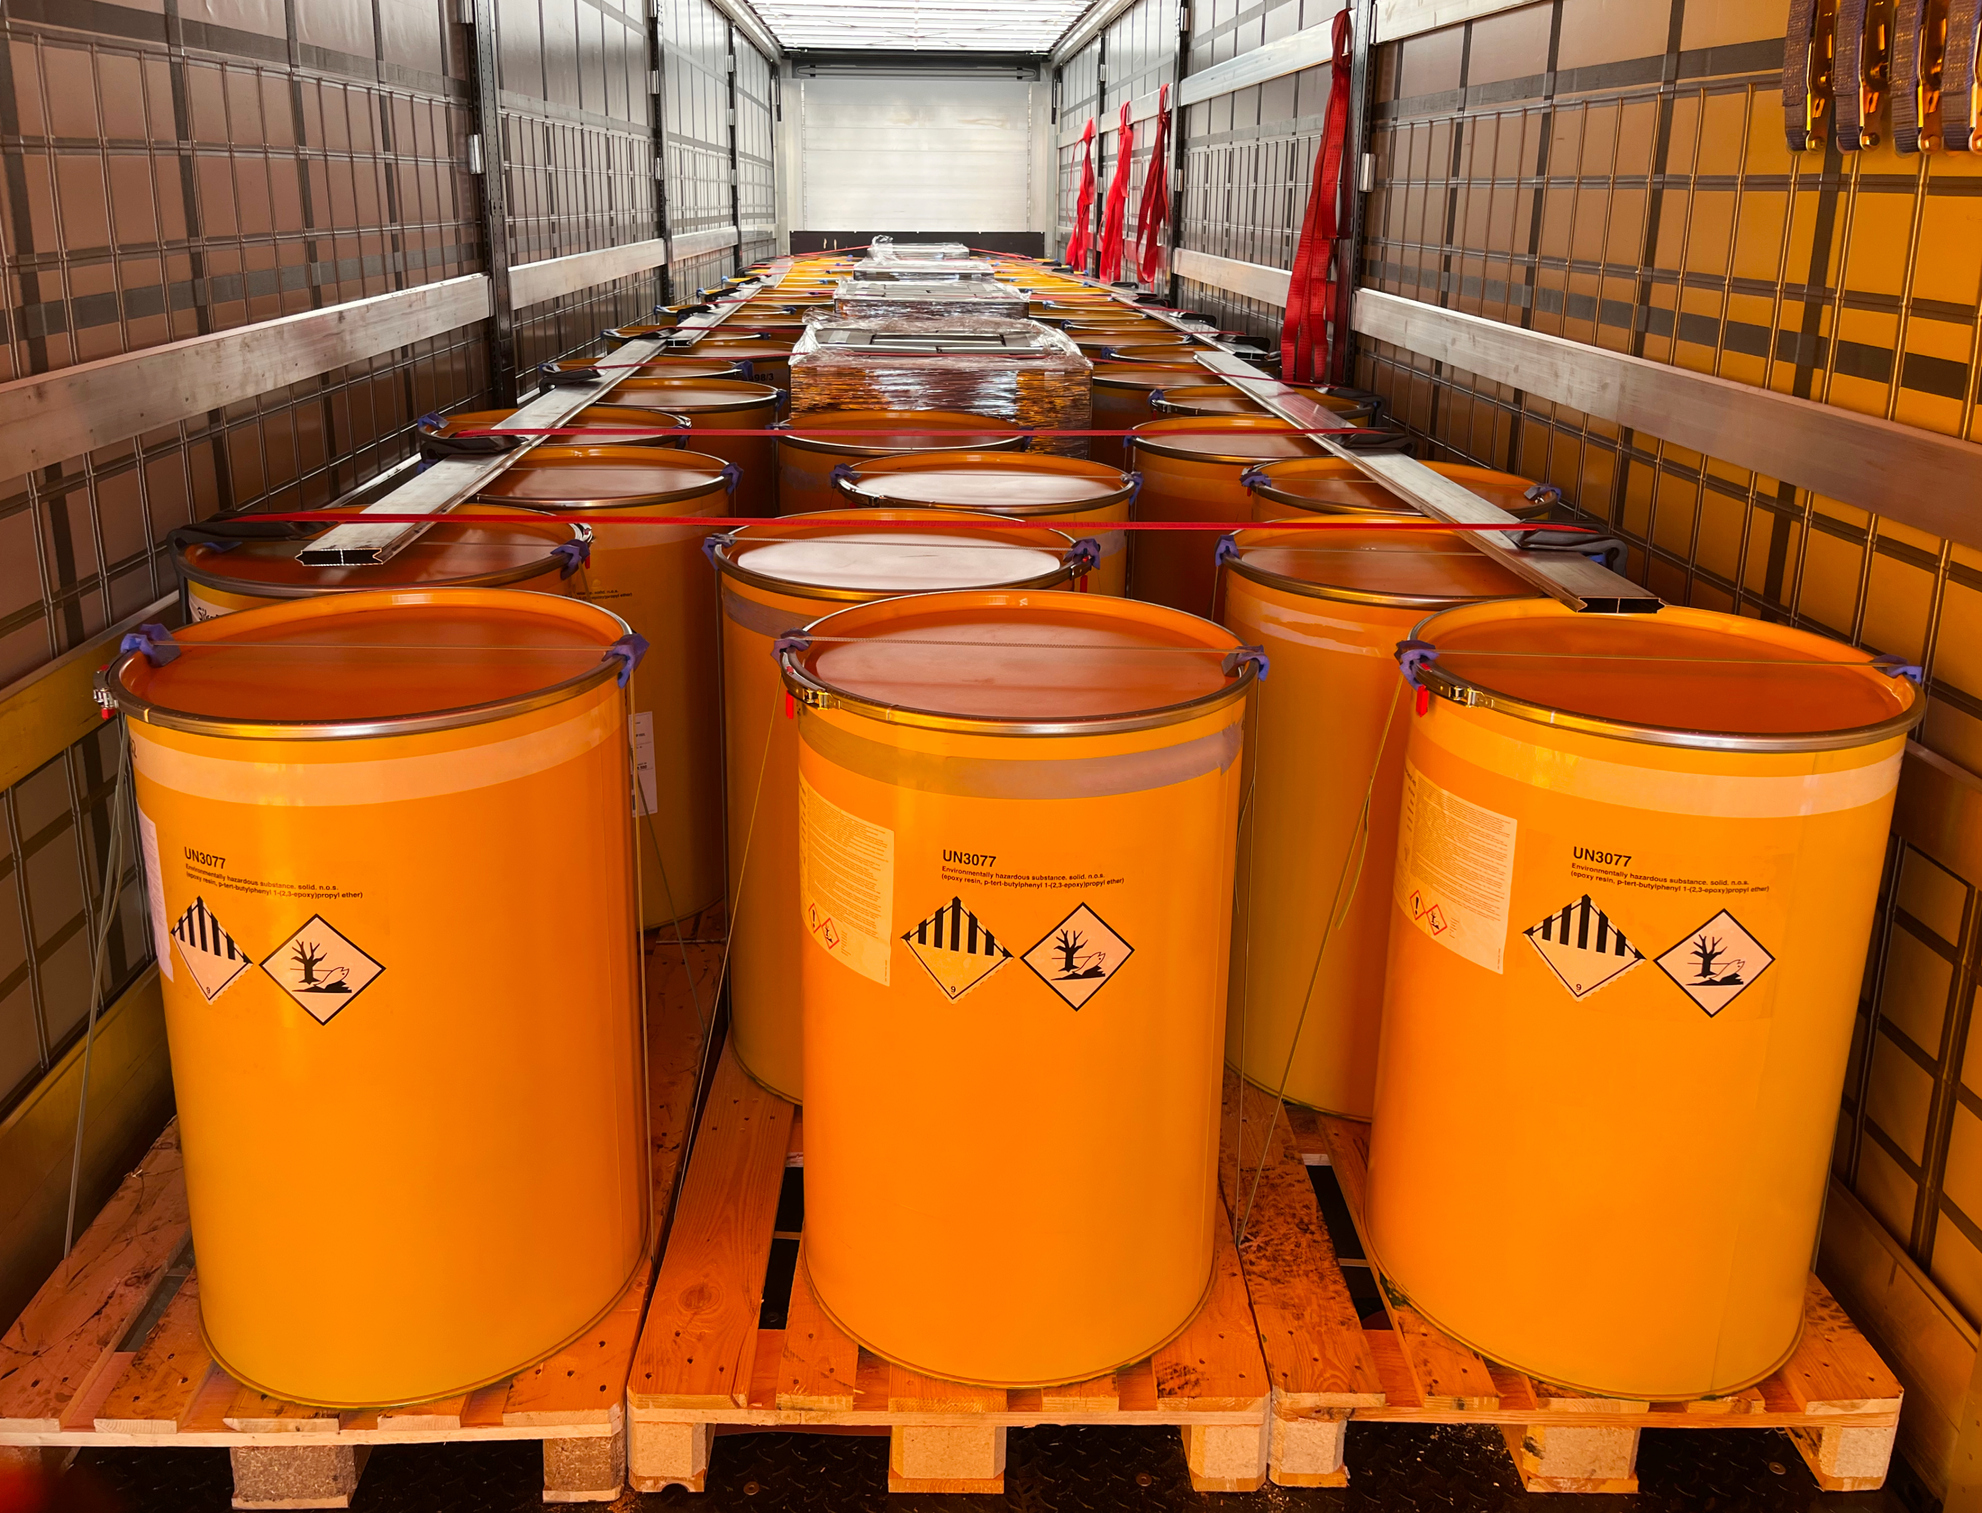 Loading, transportation and unloading of barrels with hazard class 9 in a semi-trailer. Transportation of dangerous goods by ADR cargo transport.